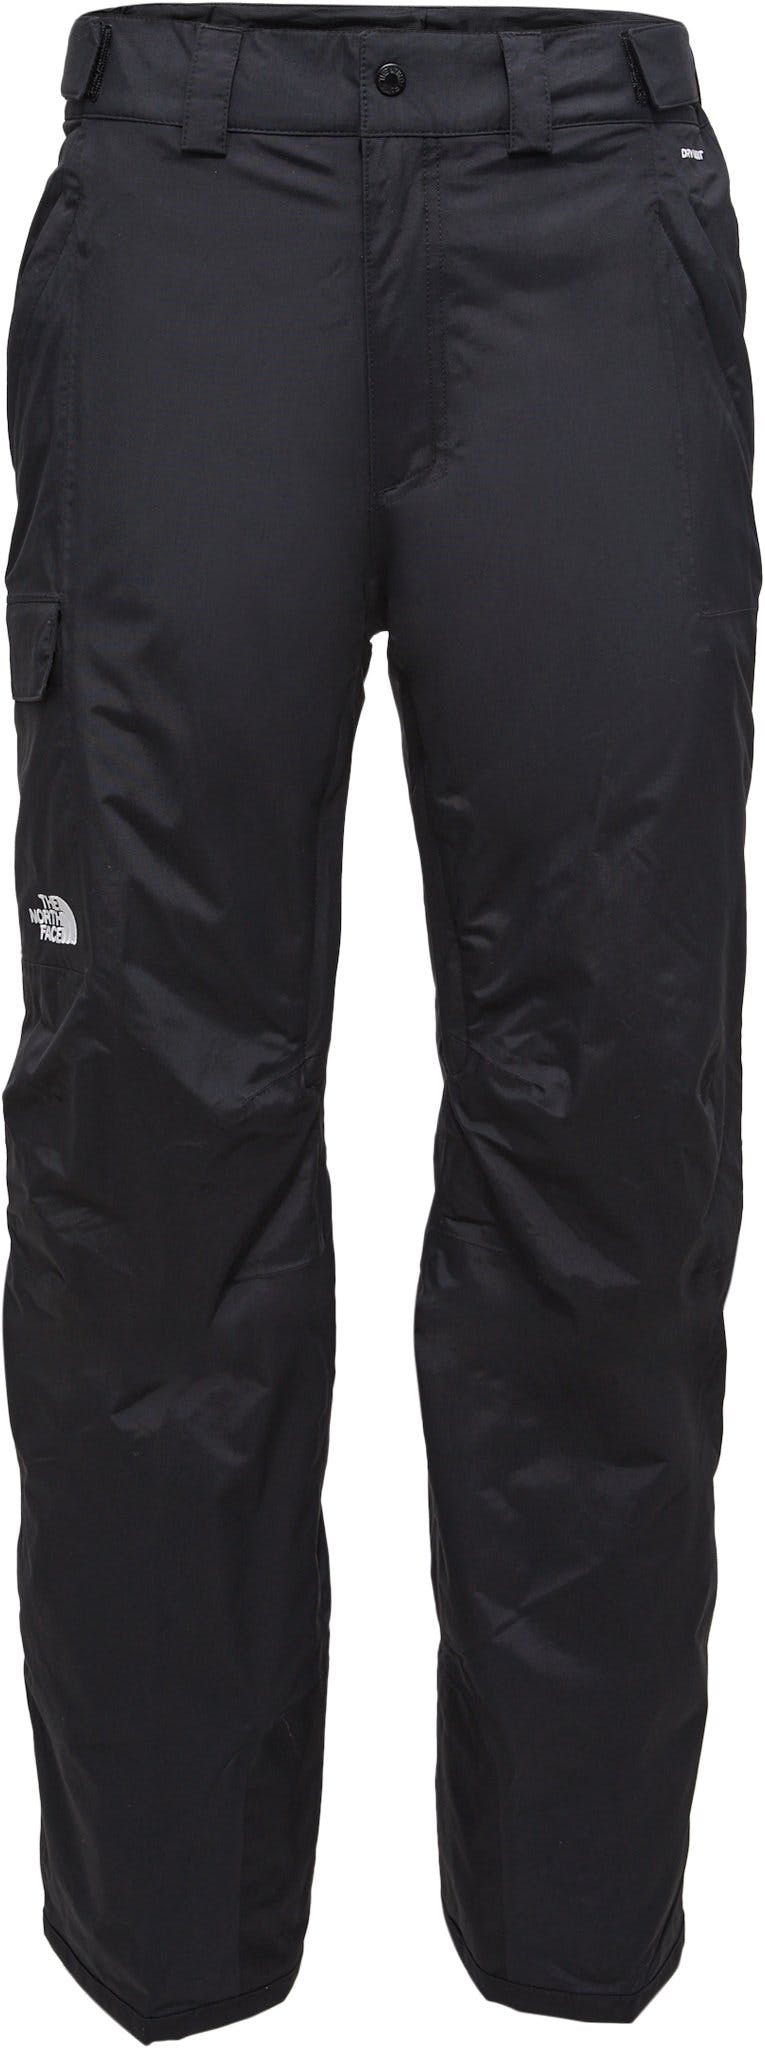 Product image for Freedom Insulated Pants - Men's